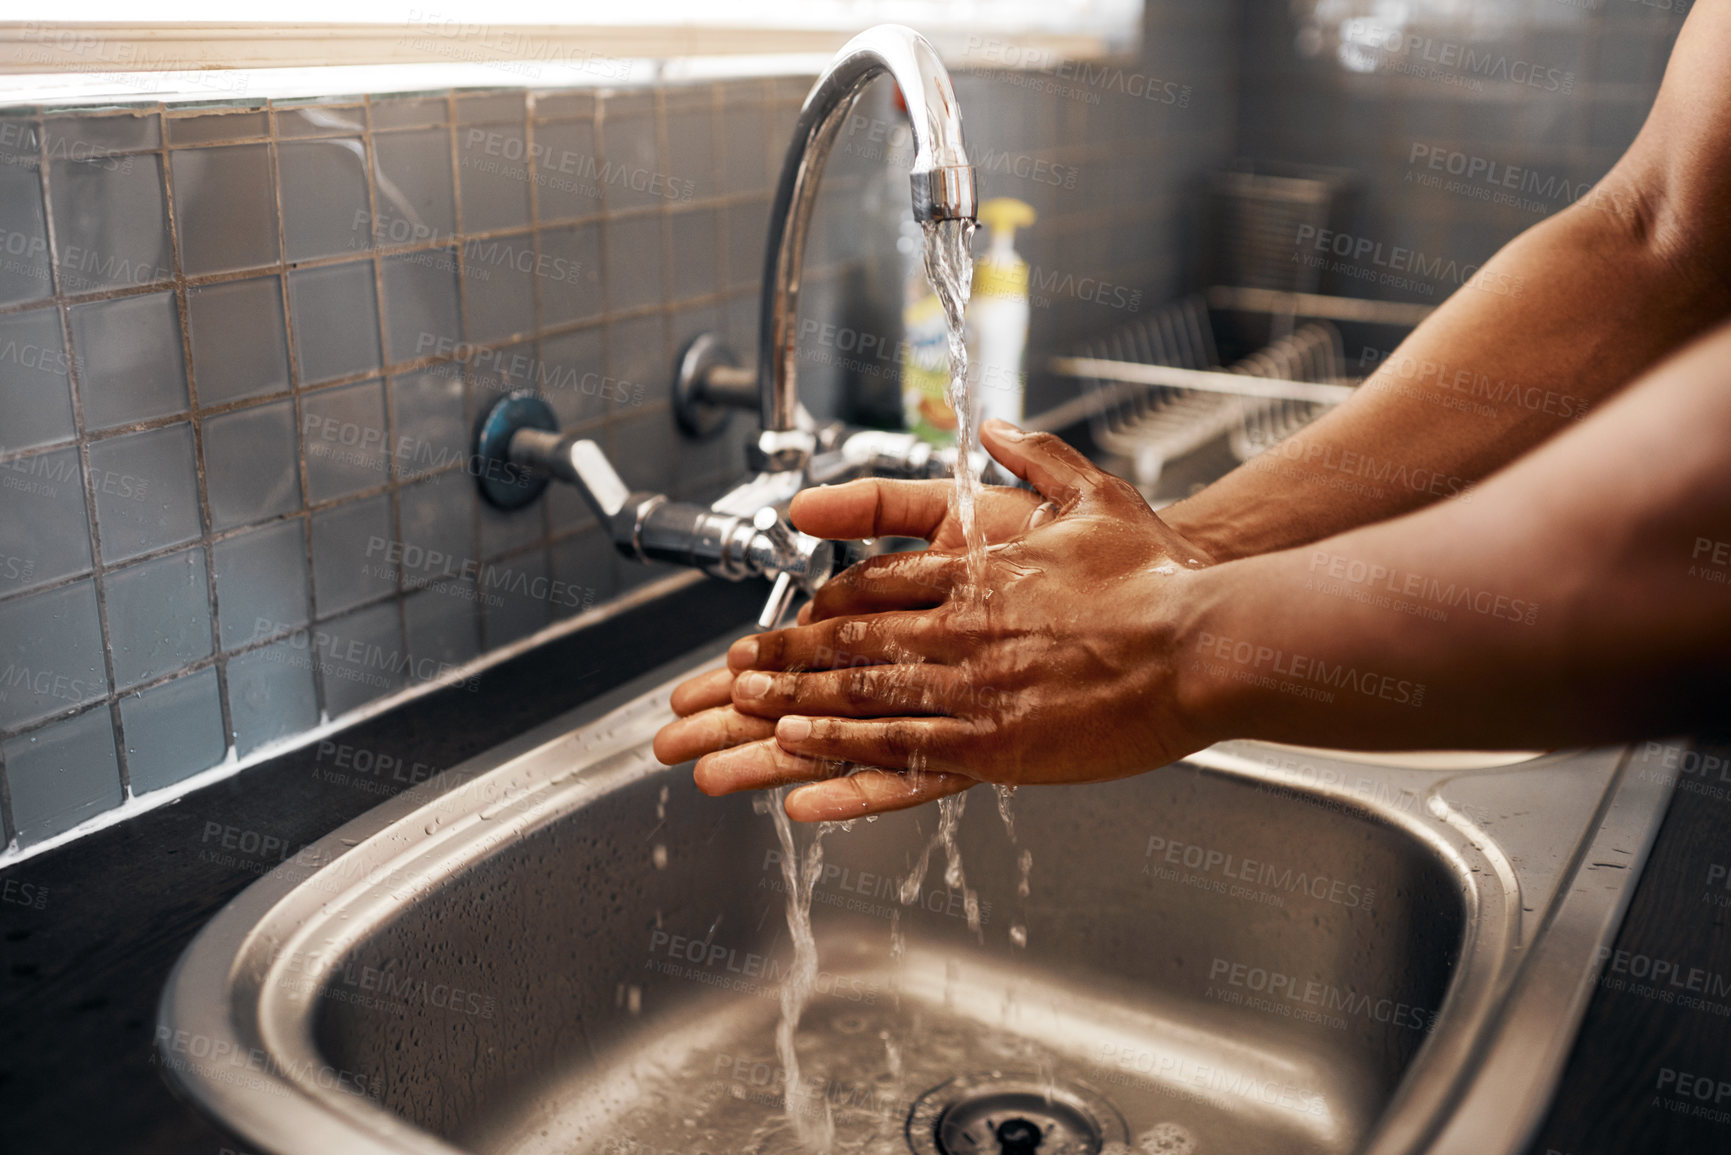 Buy stock photo Cropped shot of an unrecognizable man washing his hands in the kitchen sink at home